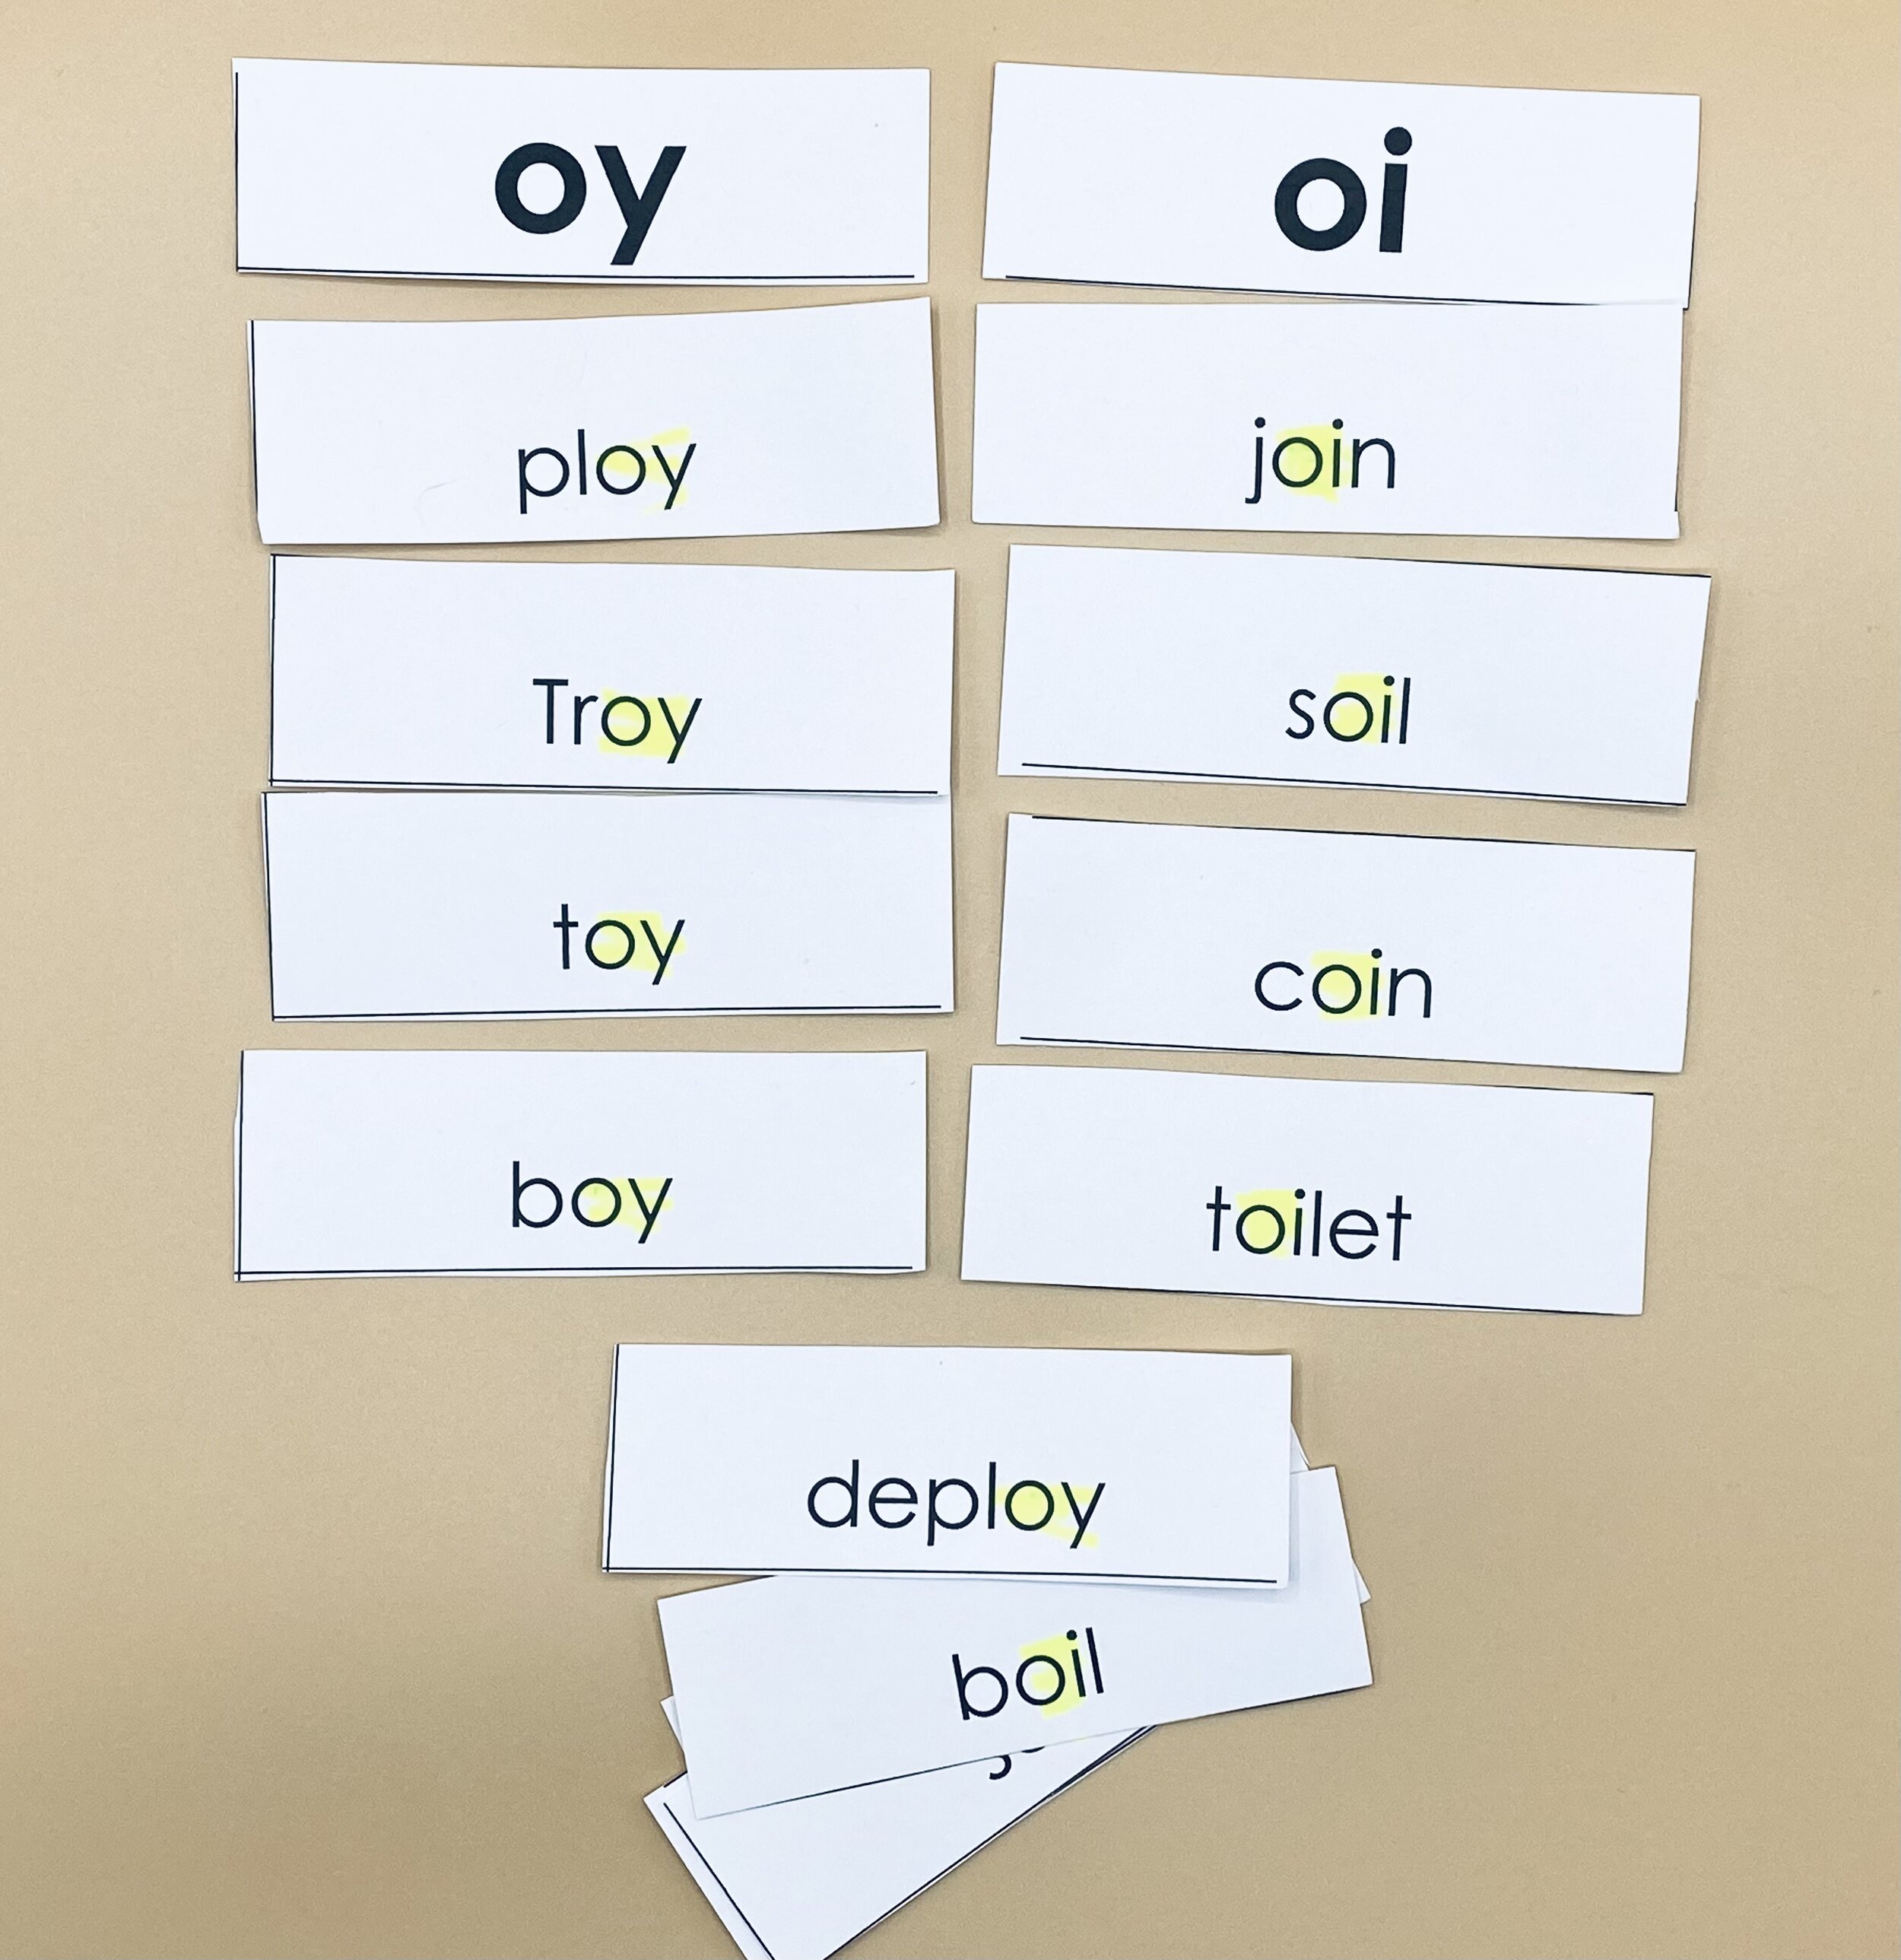 The traditional word sort.